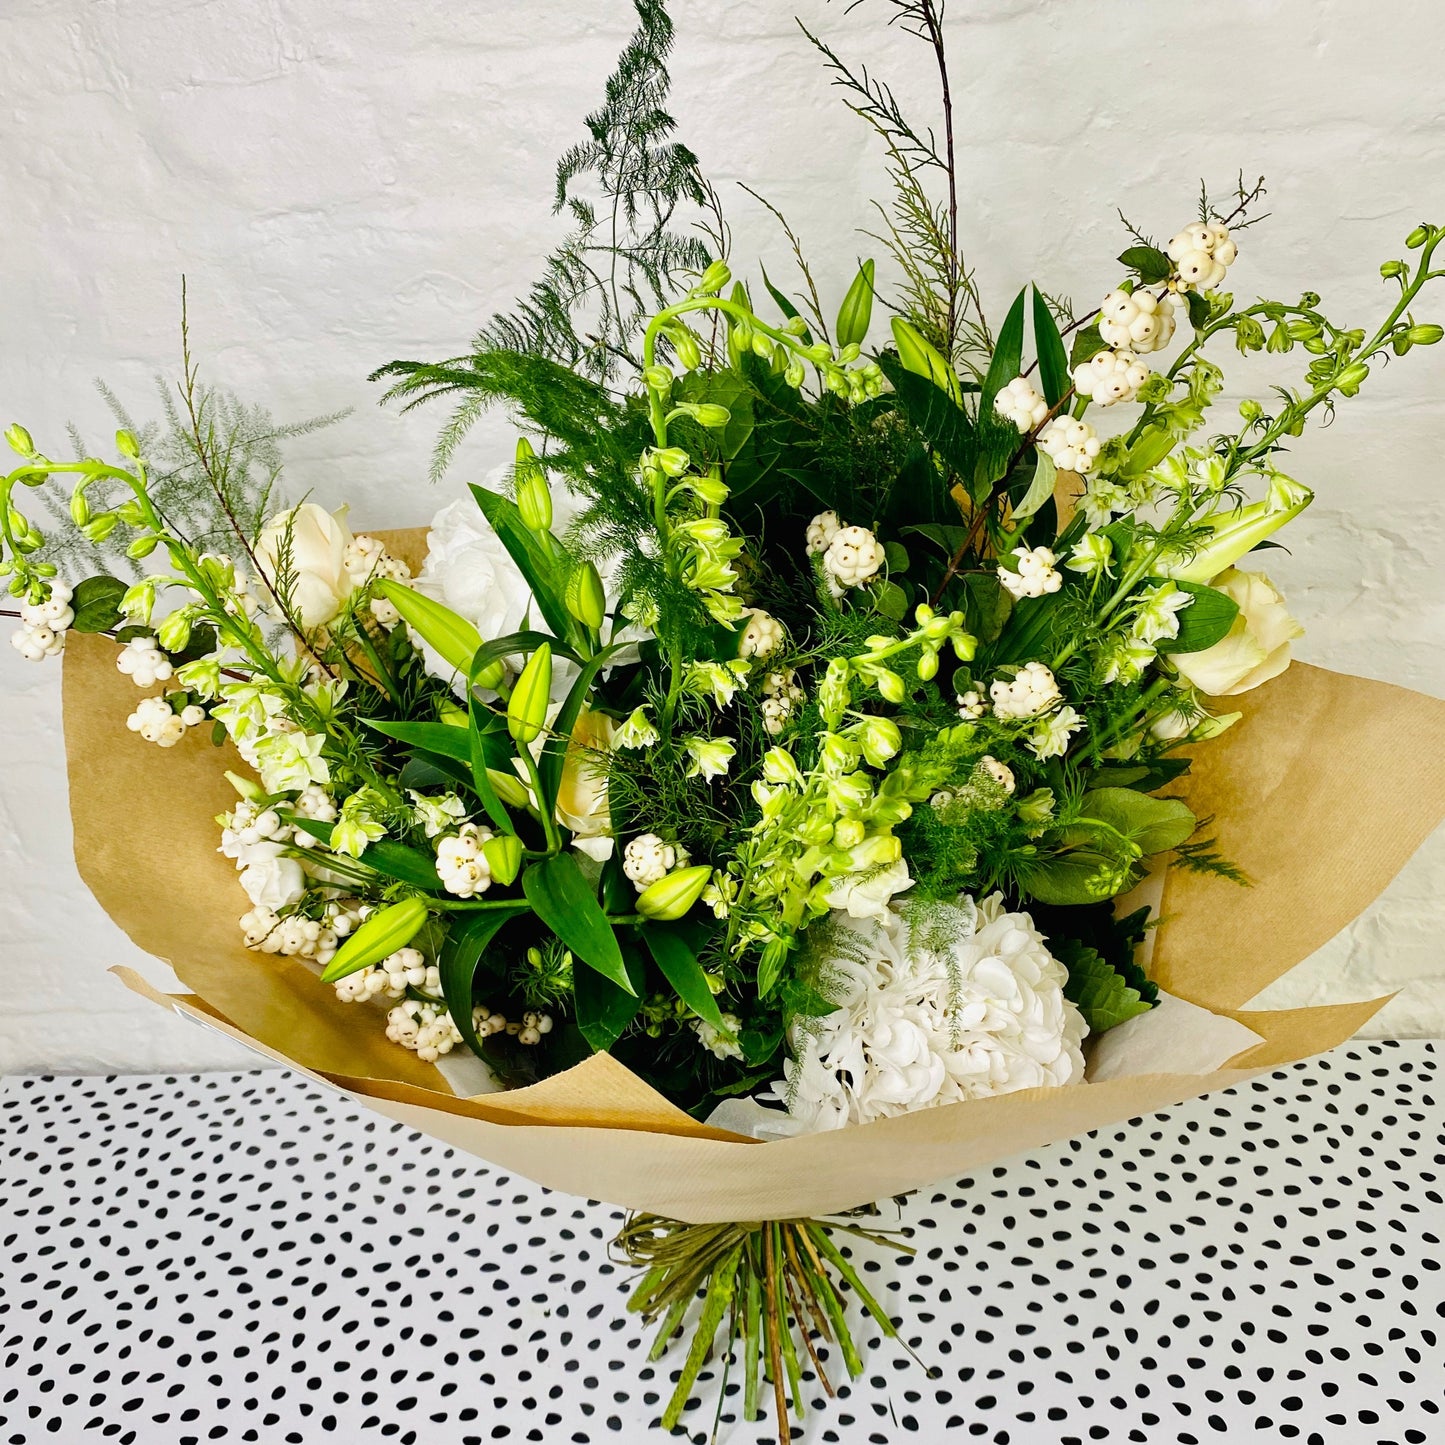 Classic & Clean Handtied Bouquet - White and Green Flowers